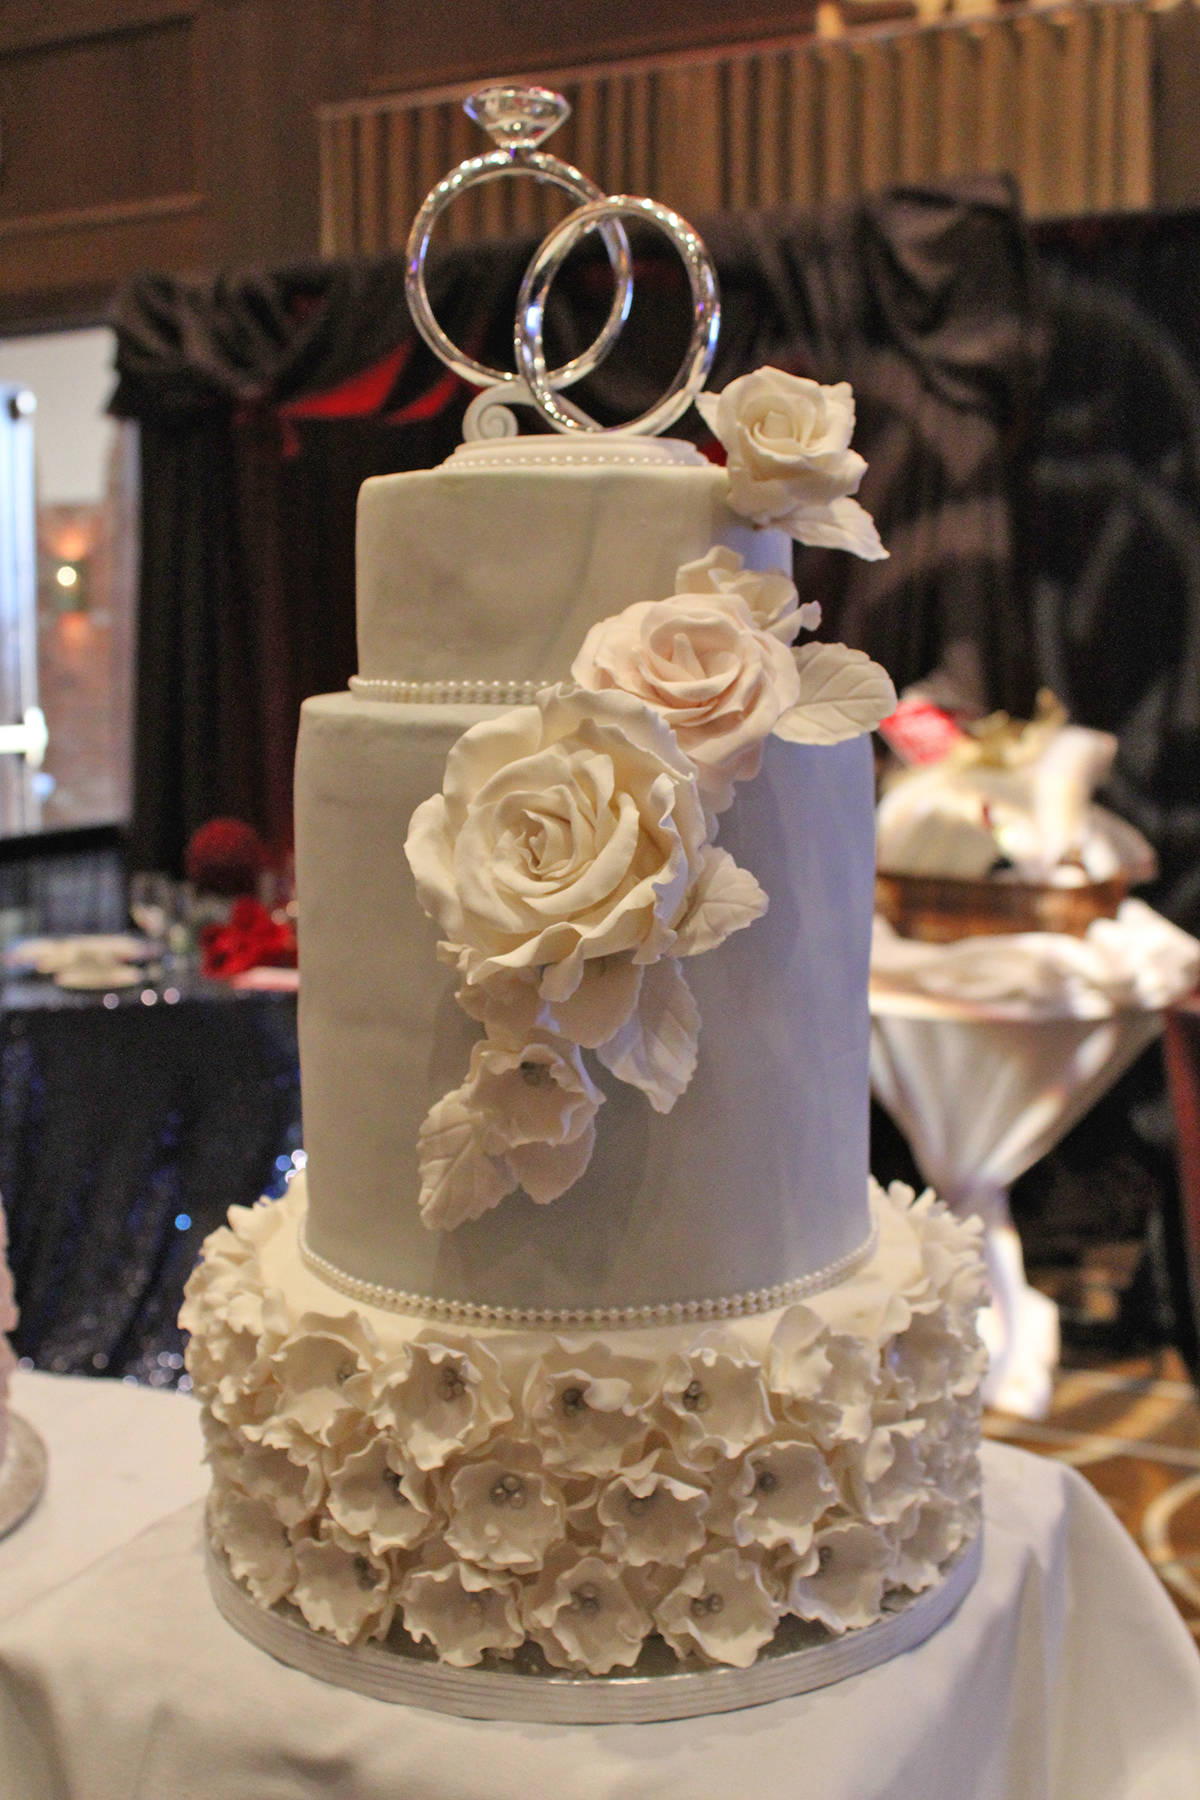 DECADENT DESSERT - One of the many cakes by Red Deer’s Sheraton Hotel was on display at the Sheraton Bridal Showcase Jan. 7th. Carlie Connolly/Red Deer Express